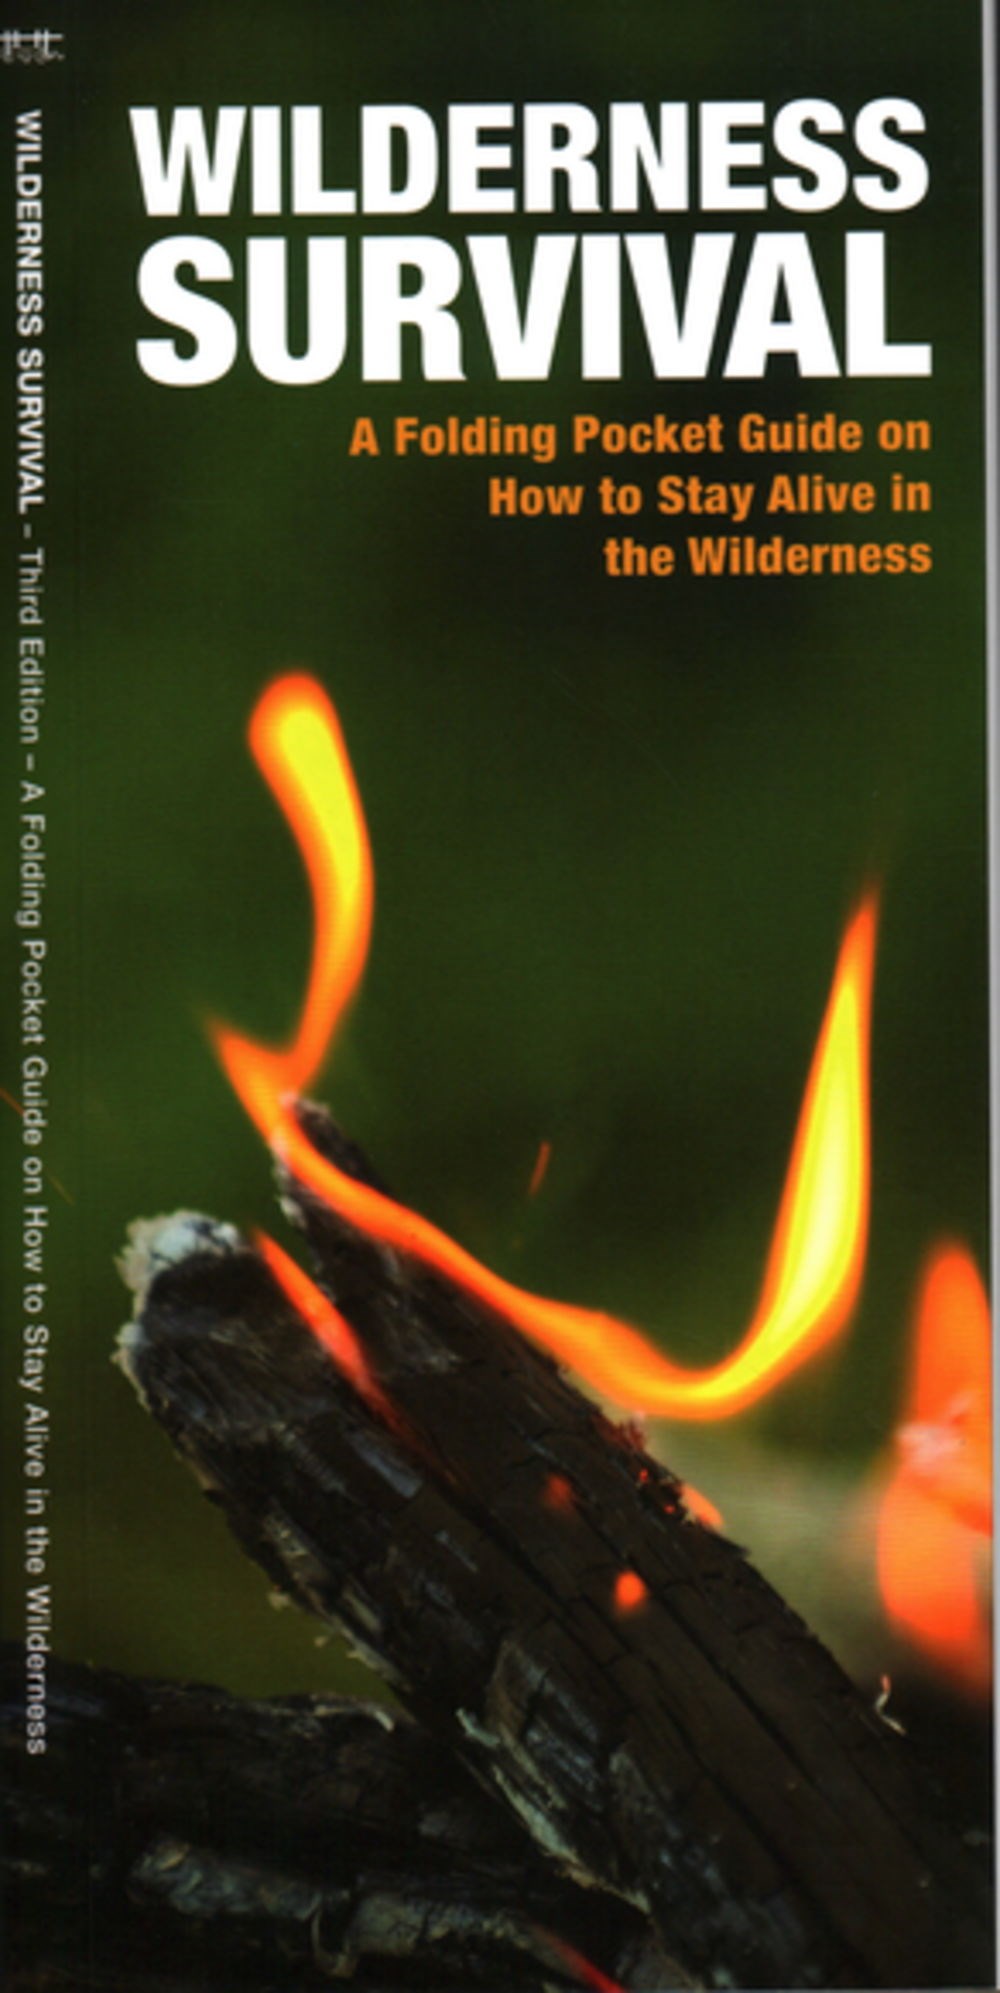 Wilderness Survival: A Folding Pocket Guide on How to Stay Alive in the Wilderness (3rd Edition)